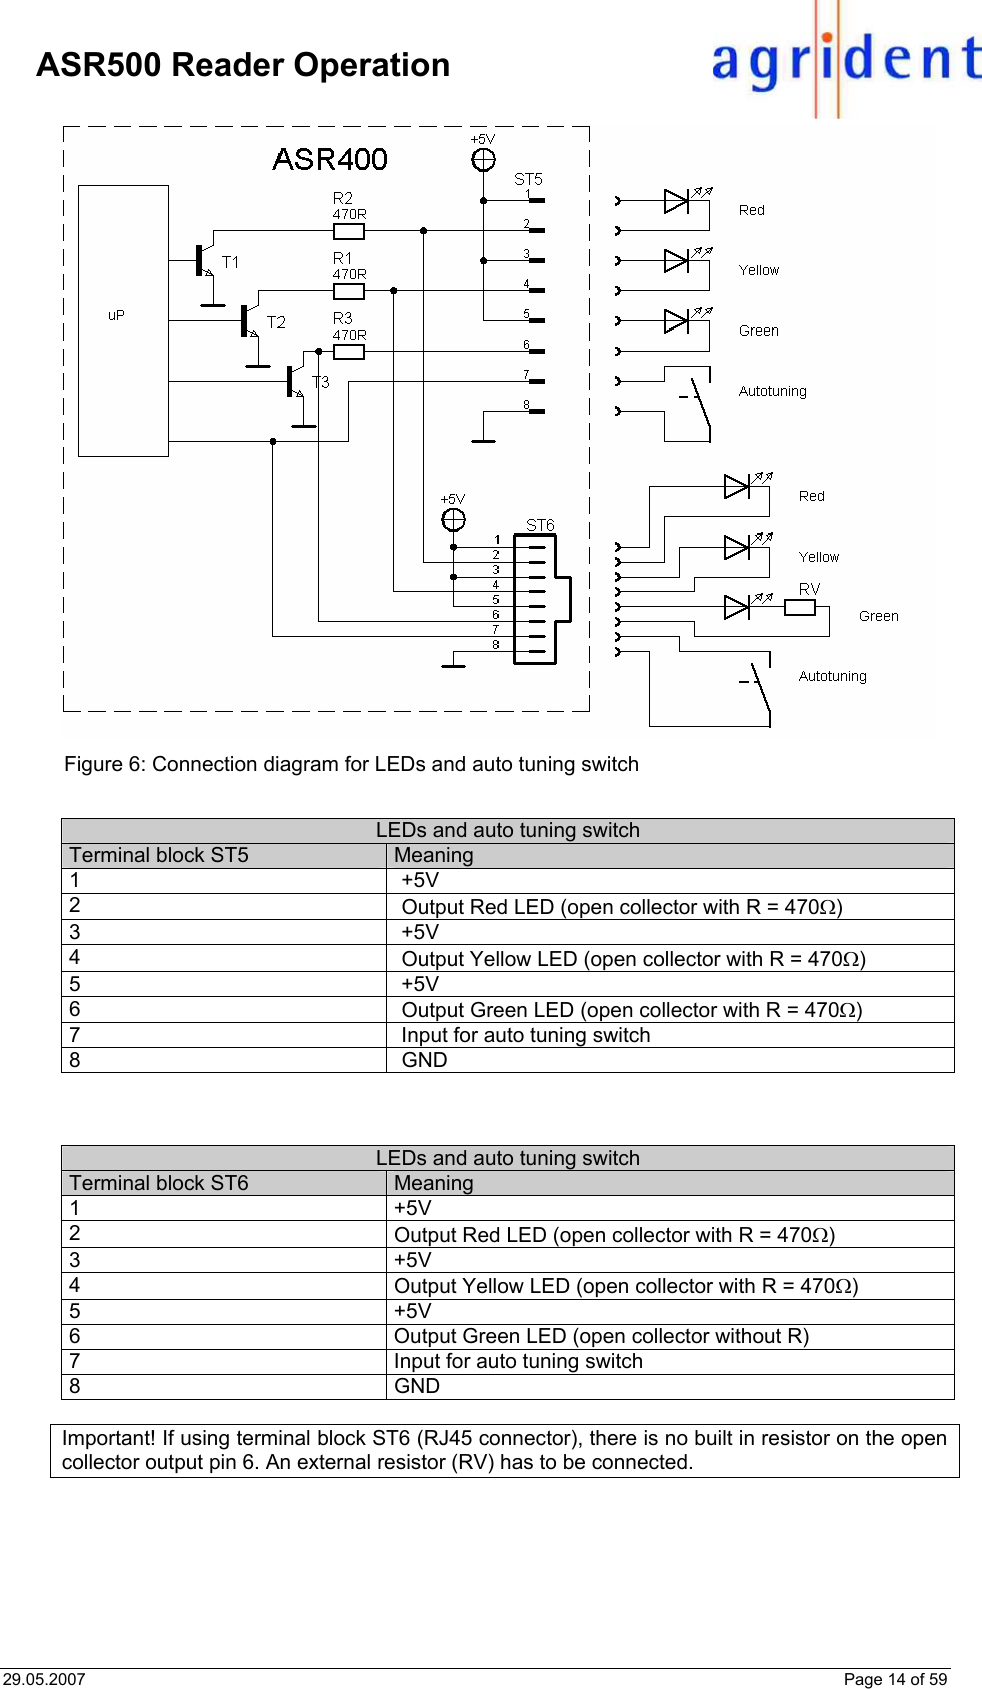 29.05.2007    Page 14 of 59     ASR500 Reader Operation  Figure 6: Connection diagram for LEDs and auto tuning switch  LEDs and auto tuning switch Terminal block ST5  Meaning 1 +5V 2  Output Red LED (open collector with R = 470Ω) 3 +5V 4  Output Yellow LED (open collector with R = 470Ω) 5 +5V 6  Output Green LED (open collector with R = 470Ω) 7  Input for auto tuning switch 8 GND    LEDs and auto tuning switch Terminal block ST6  Meaning 1 +5V 2  Output Red LED (open collector with R = 470Ω) 3 +5V 4  Output Yellow LED (open collector with R = 470Ω) 5 +5V 6  Output Green LED (open collector without R) 7  Input for auto tuning switch 8 GND  Important! If using terminal block ST6 (RJ45 connector), there is no built in resistor on the open collector output pin 6. An external resistor (RV) has to be connected.  